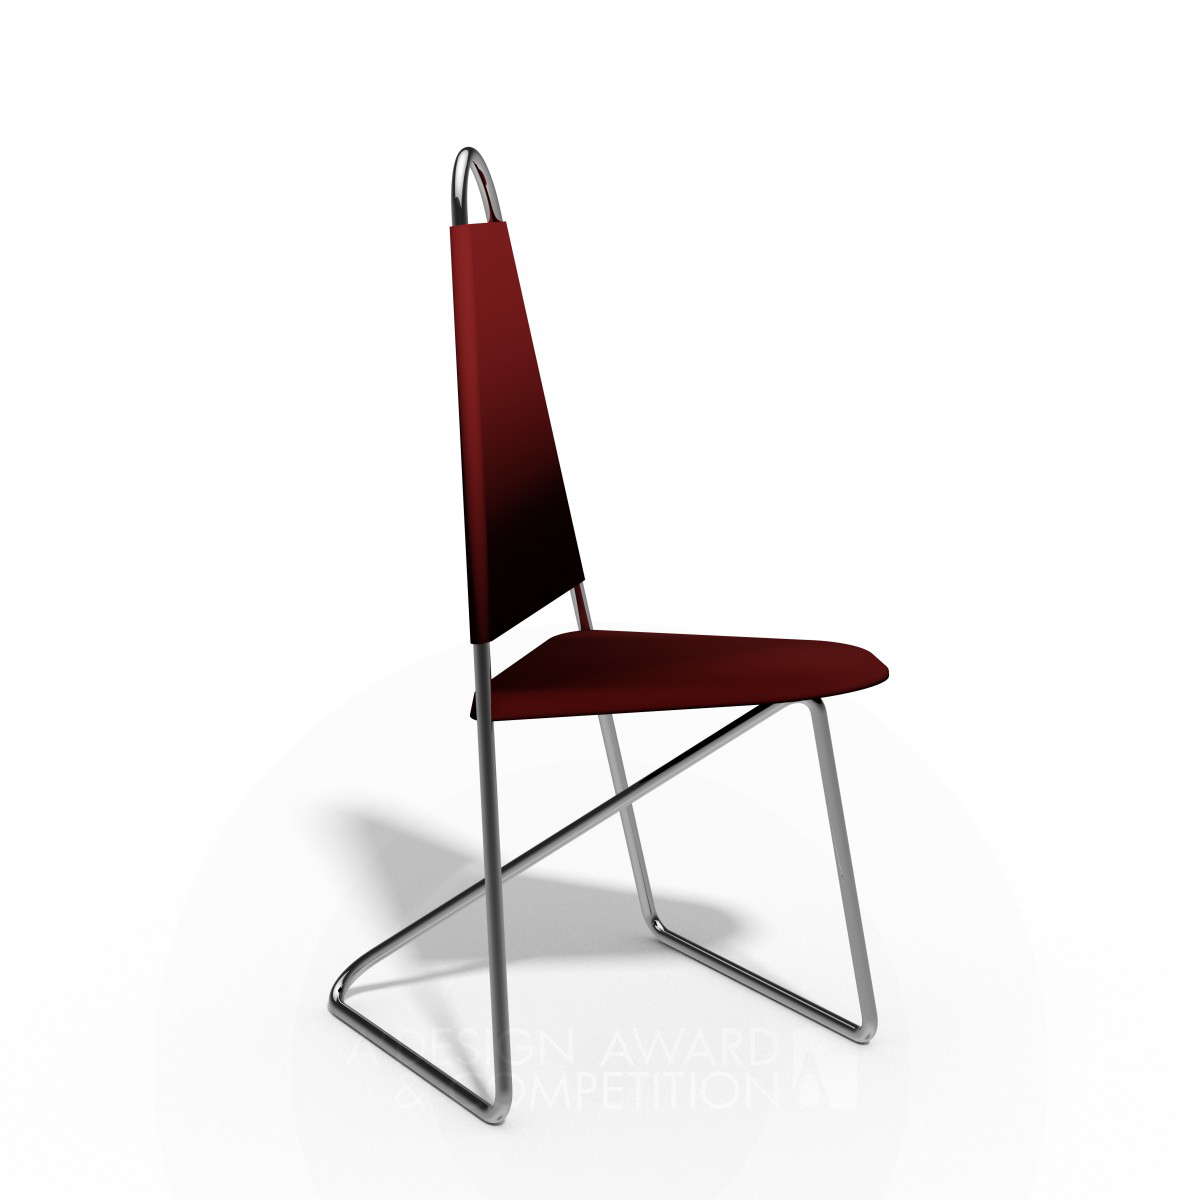 xifix-one <b>Chair, Stacking Chair